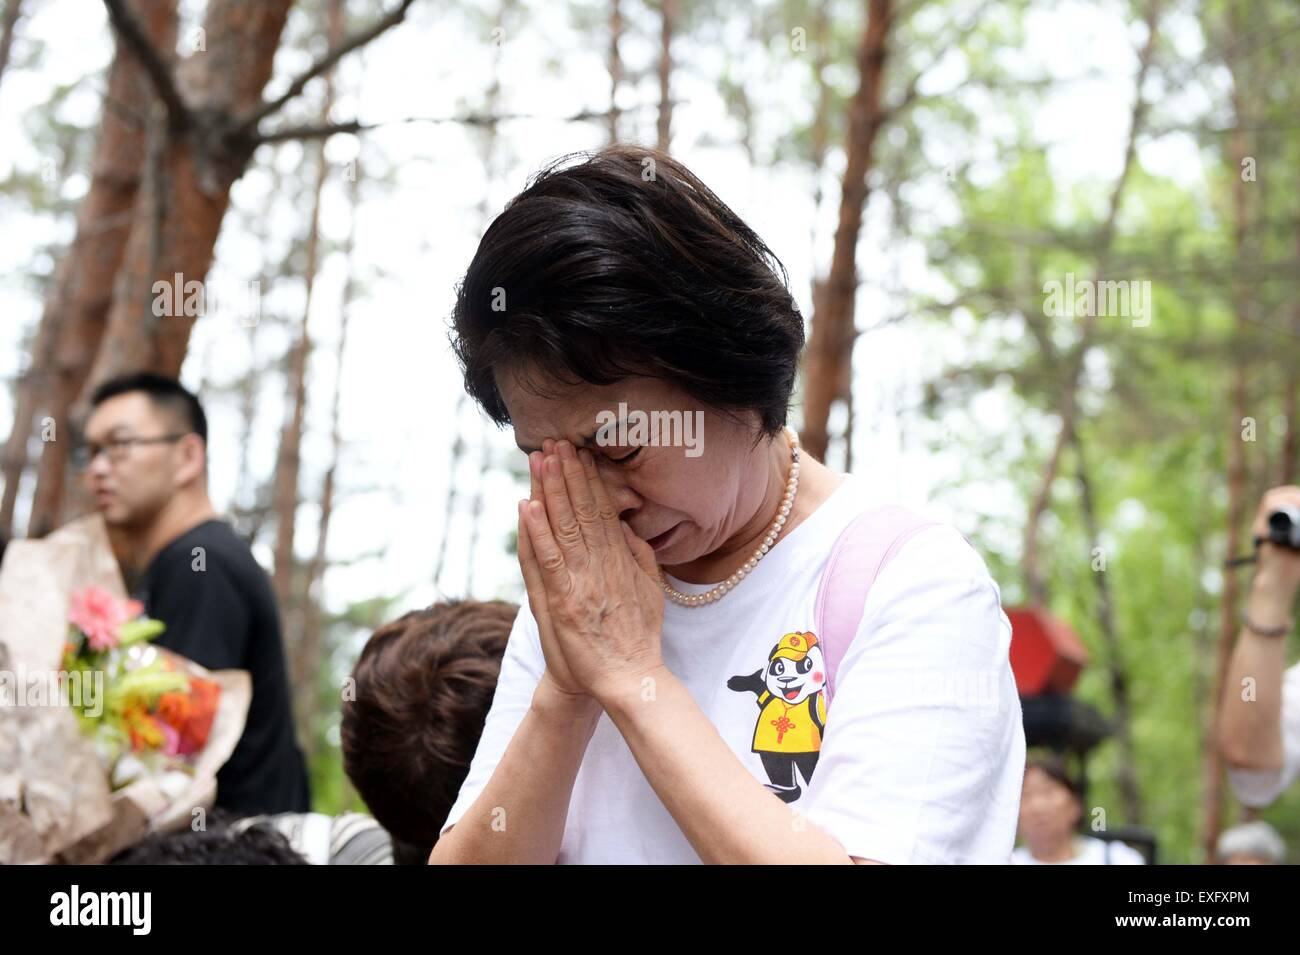 (150714) -- HARBIN, July 14, 2015 (Xinhua) -- Ikeda Sumie, director general of a Tokyo support group for those Japanese returned from China, mourns for adoptive parents in front of a grave in a cemetery to memorize adoptive Chinese parents in Fangzheng County near Harbin, capital of northeast China's Heilongjiang Province, July 13, 2015. A group of 54 Japanese citizens, all now orphans, on Monday paid a visit to the graves of their adoptive Chinese parents here. Abandoned by their birth parents during the hasty retreat at the end of World War II in 1945, the orphans, now over 70 years old, w Stock Photo